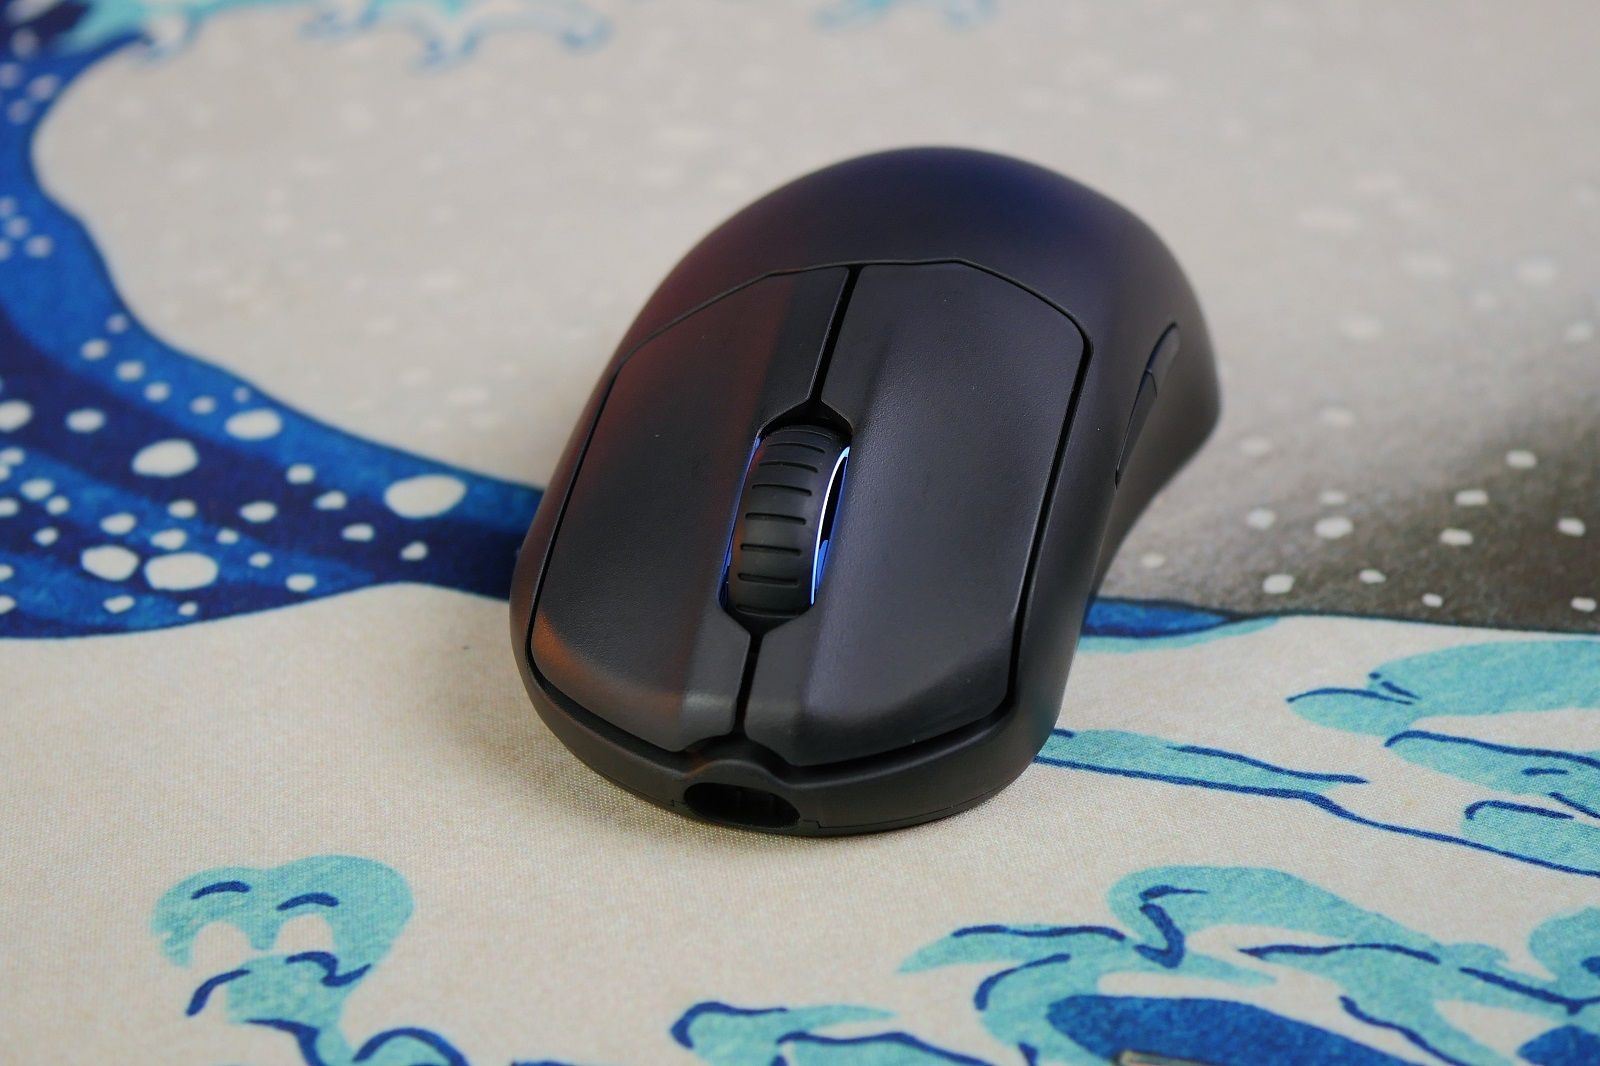 SteelSeries Prime Wireless gaming mouse review photo 3